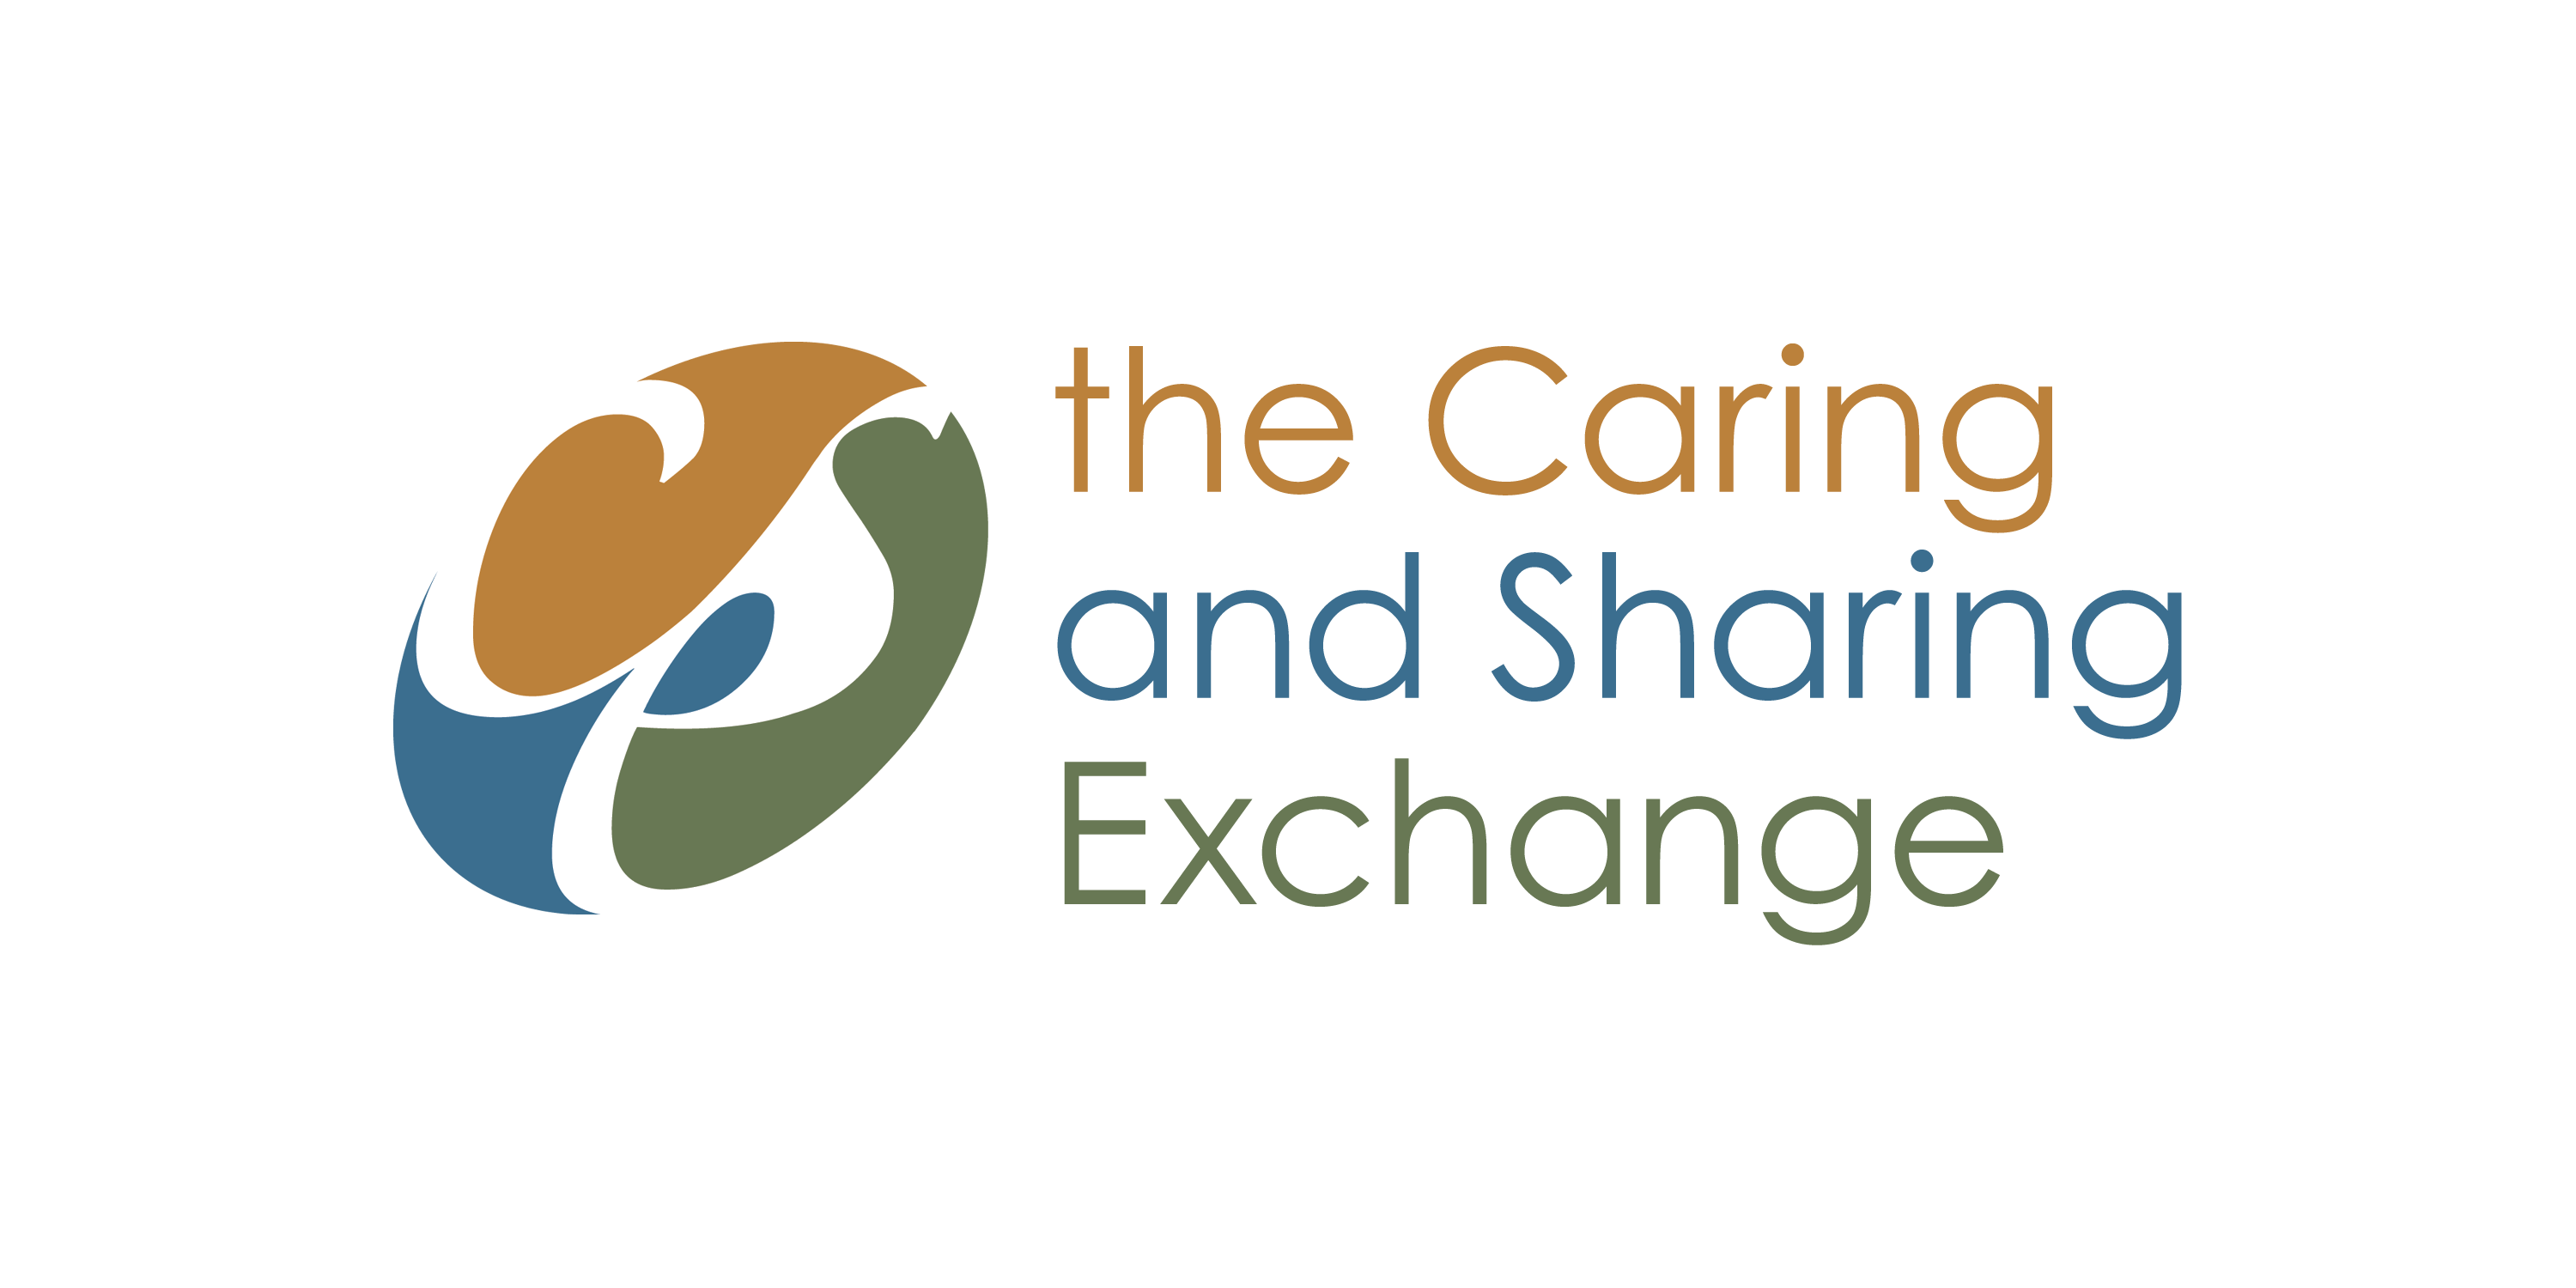 The Caring and Sharing Exchange